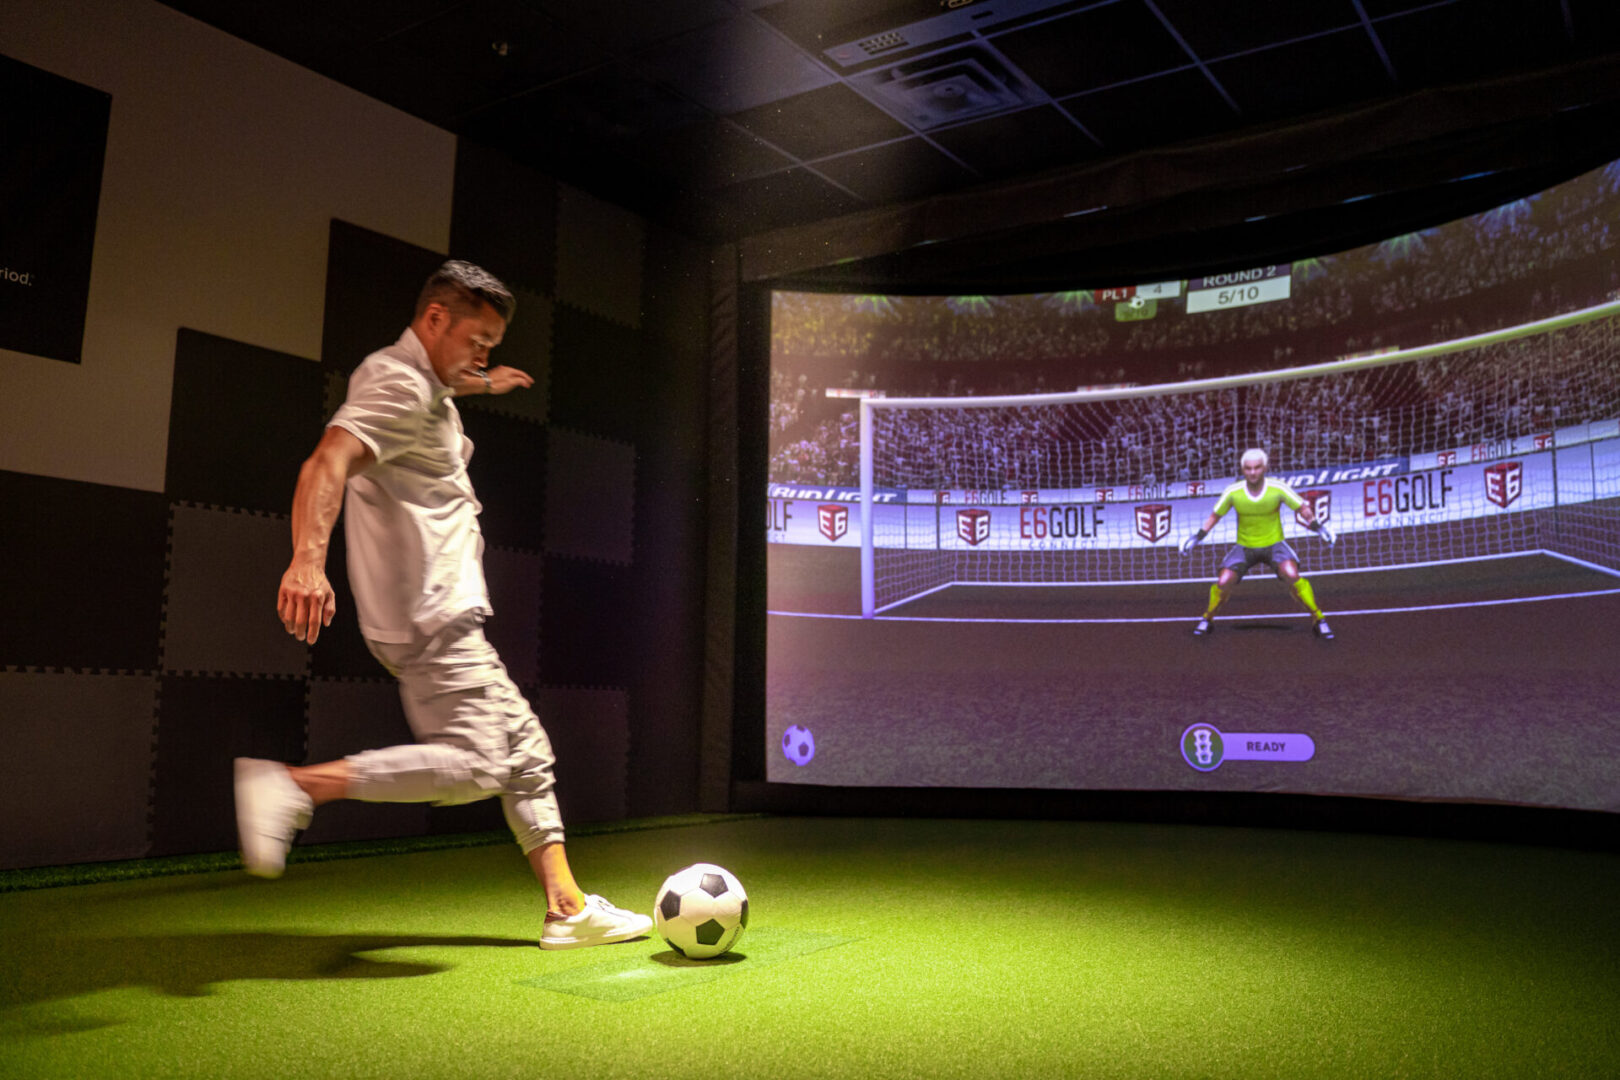 A man kicking a soccer ball in a video game room.